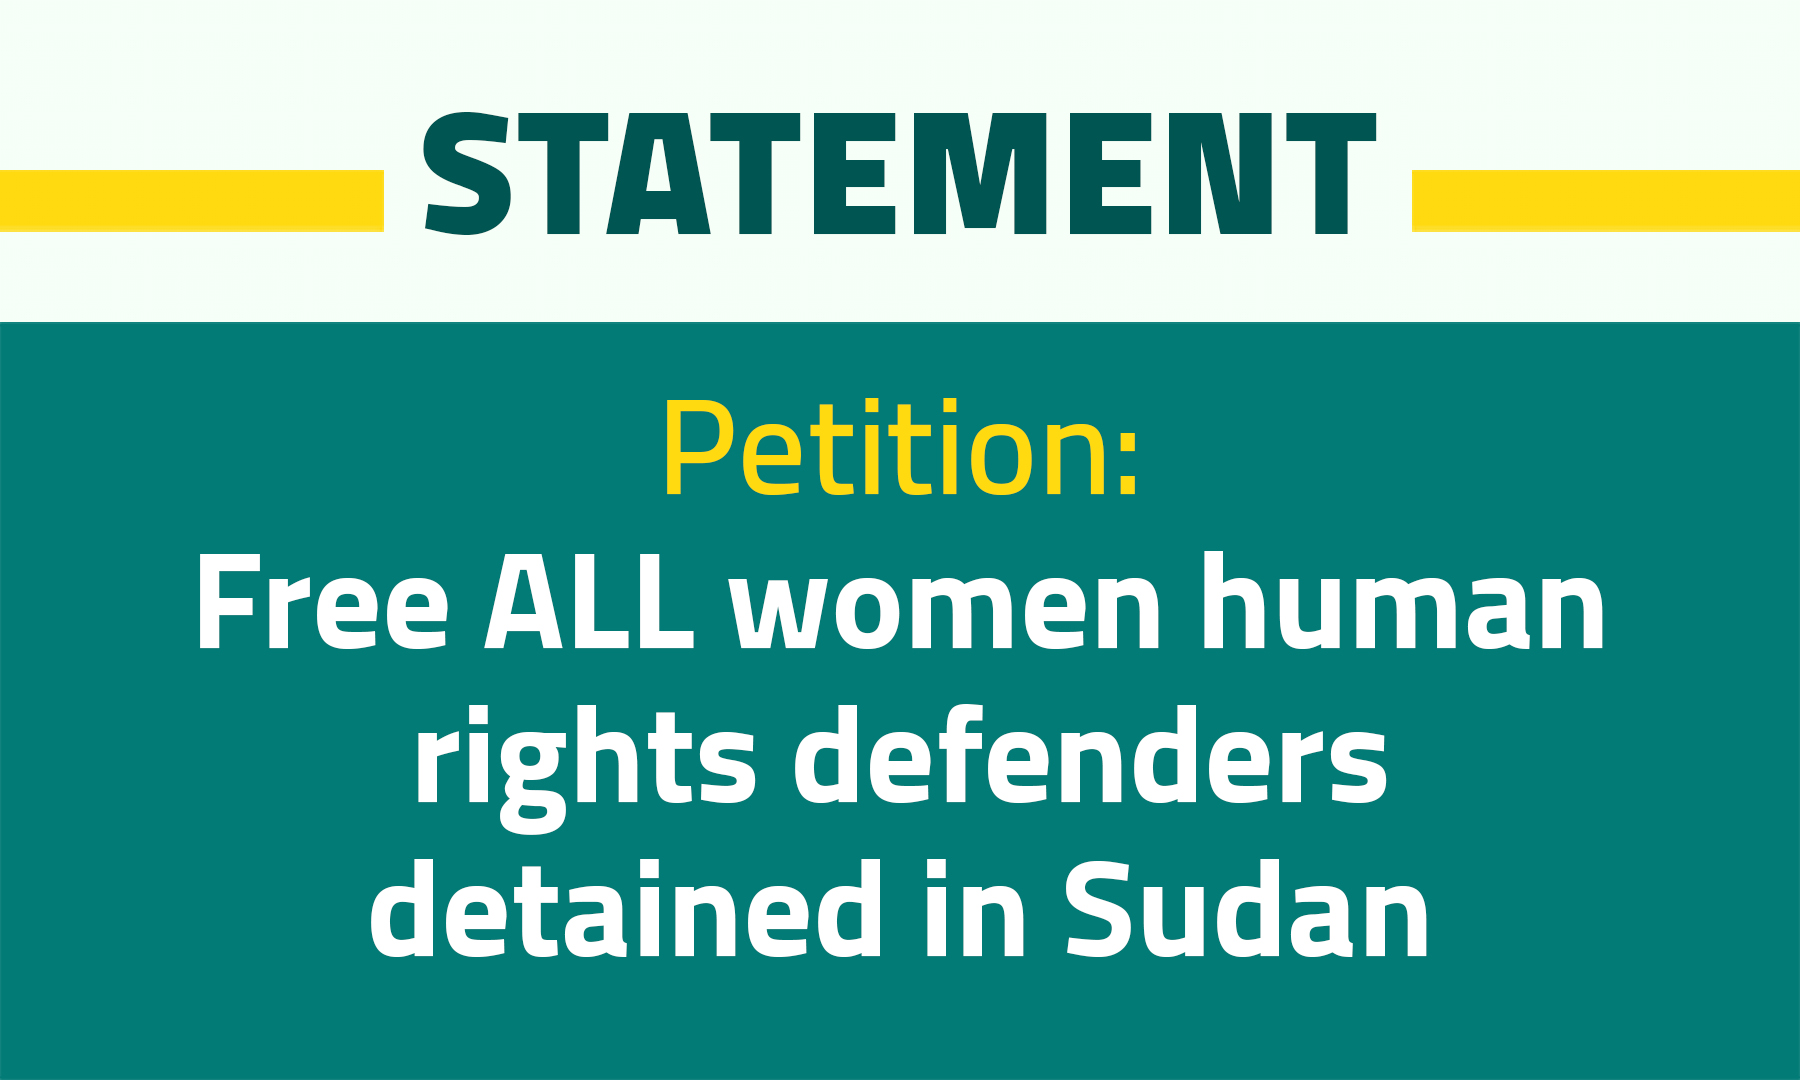 Petition Free ALL women human rights defenders detained in Sudan